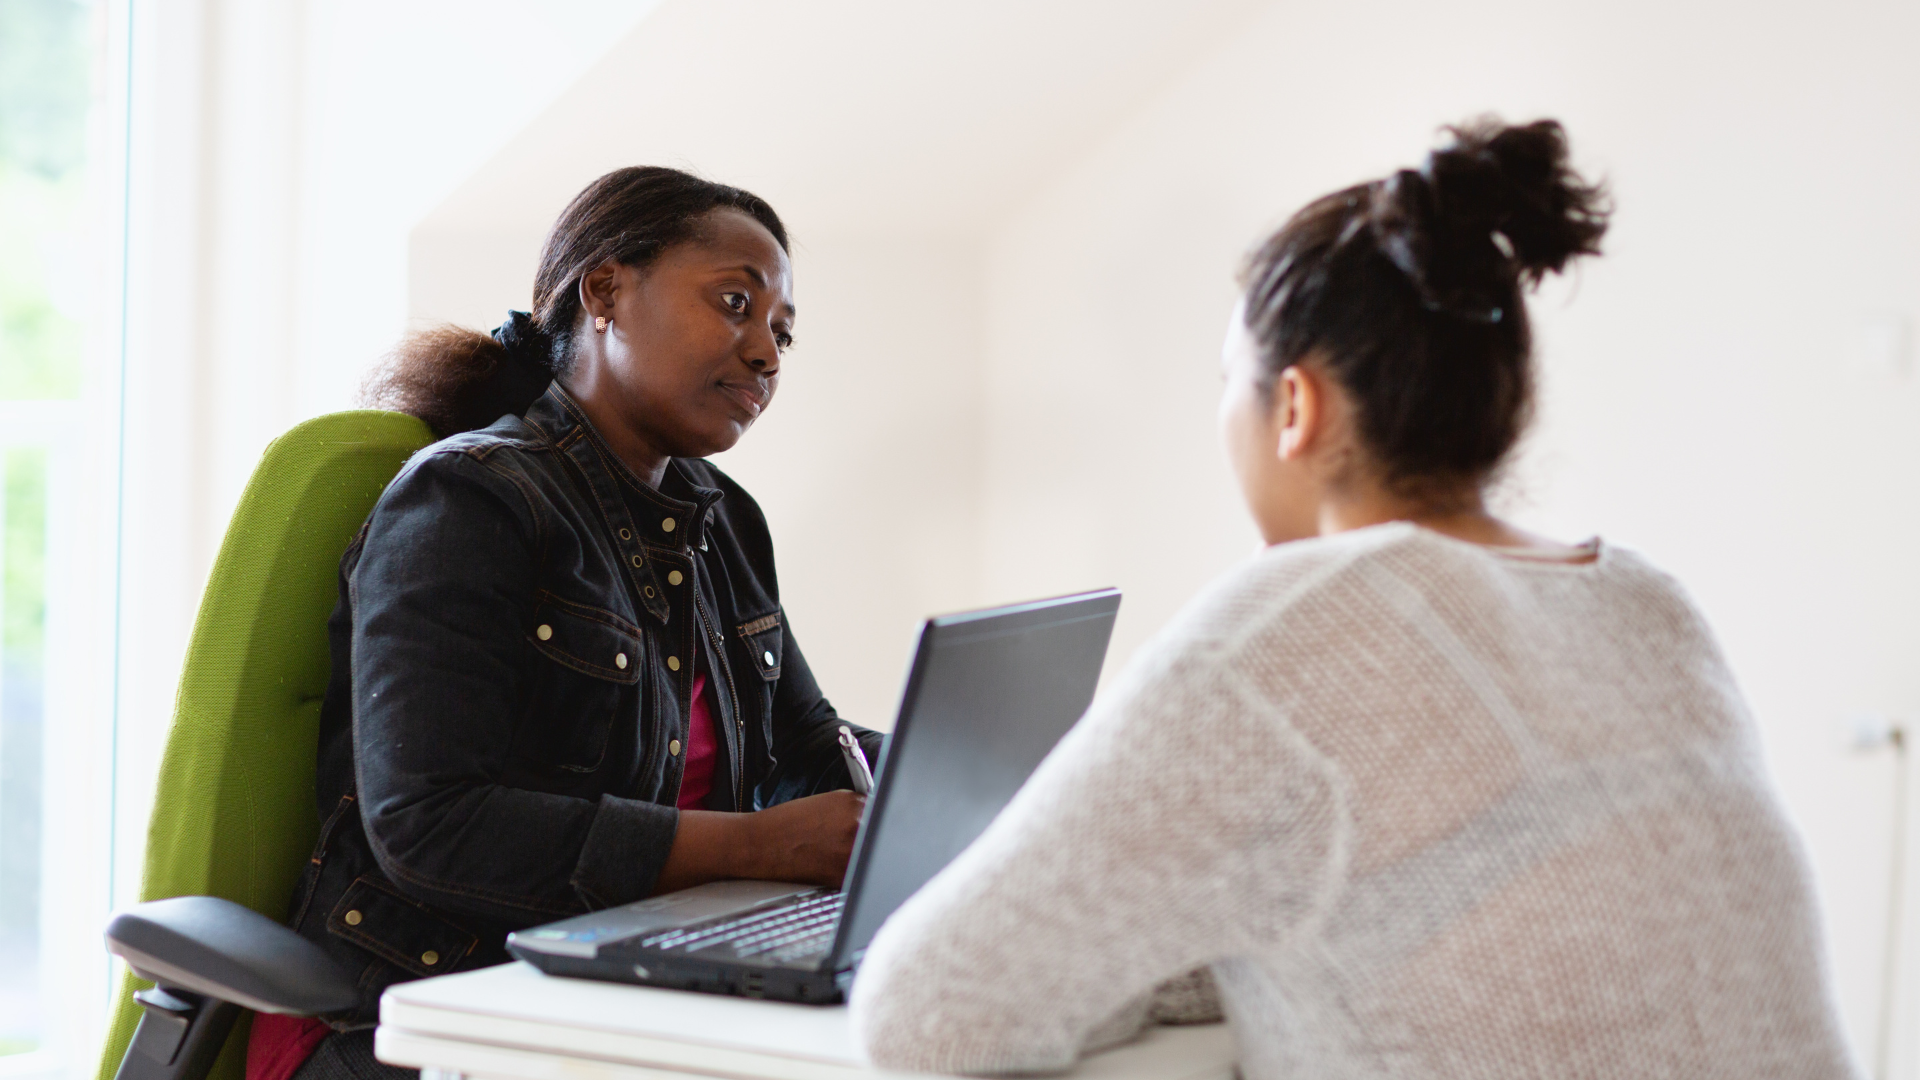 An African American Woman in a denim jacket looks serious and is speaking to a young individual in a white sweater. The woman is on her computer leveraging ai in social work